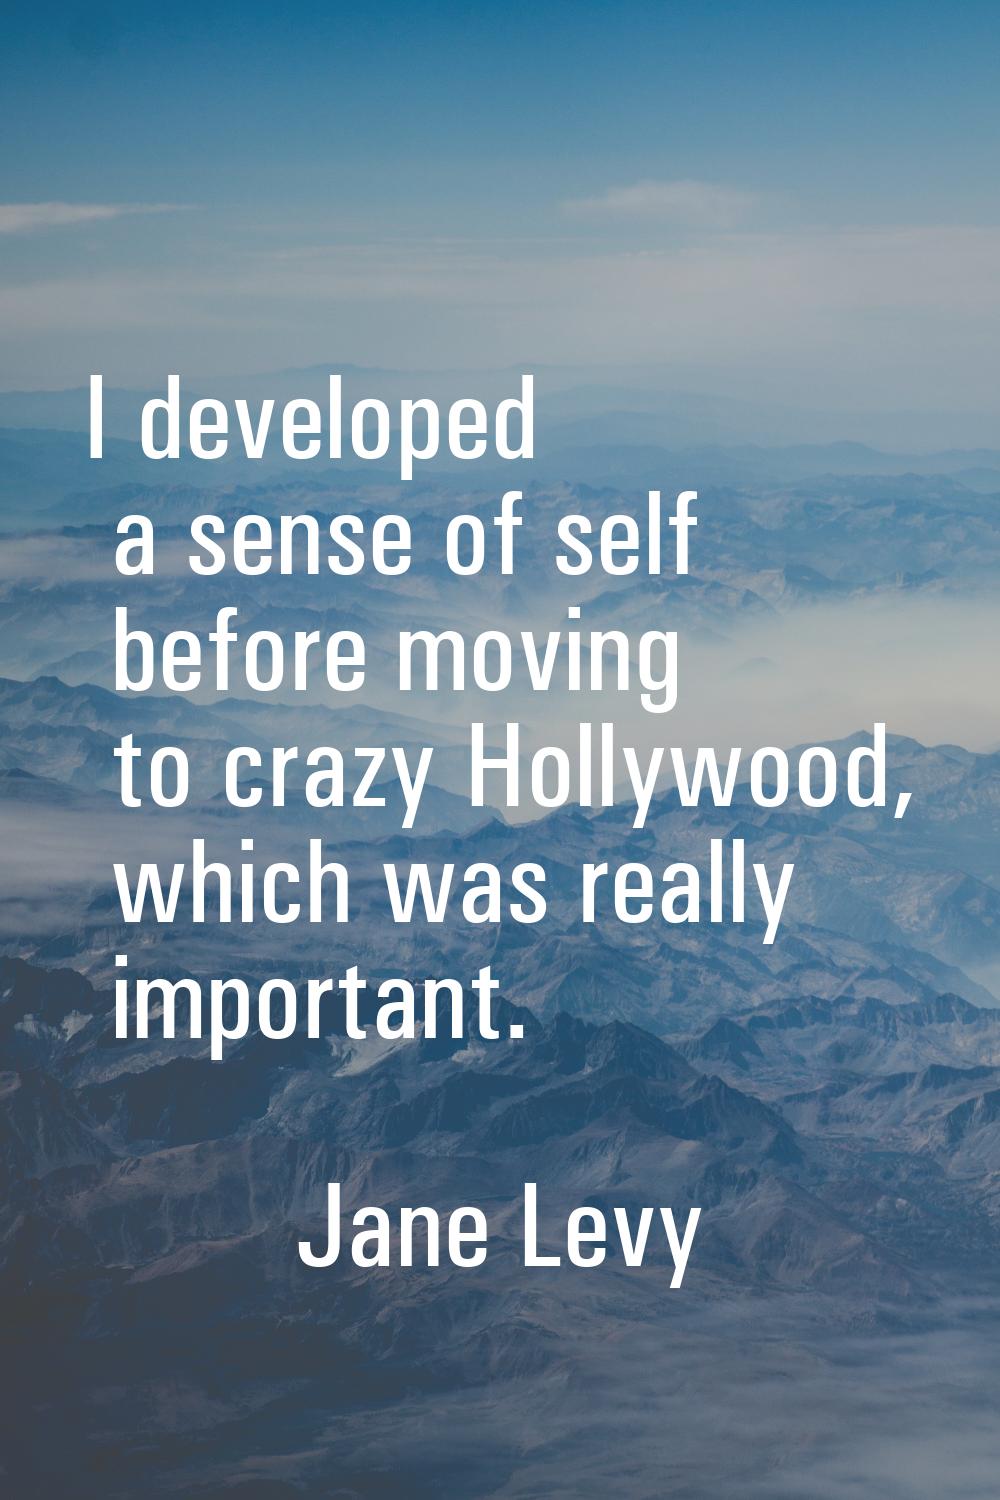 I developed a sense of self before moving to crazy Hollywood, which was really important.